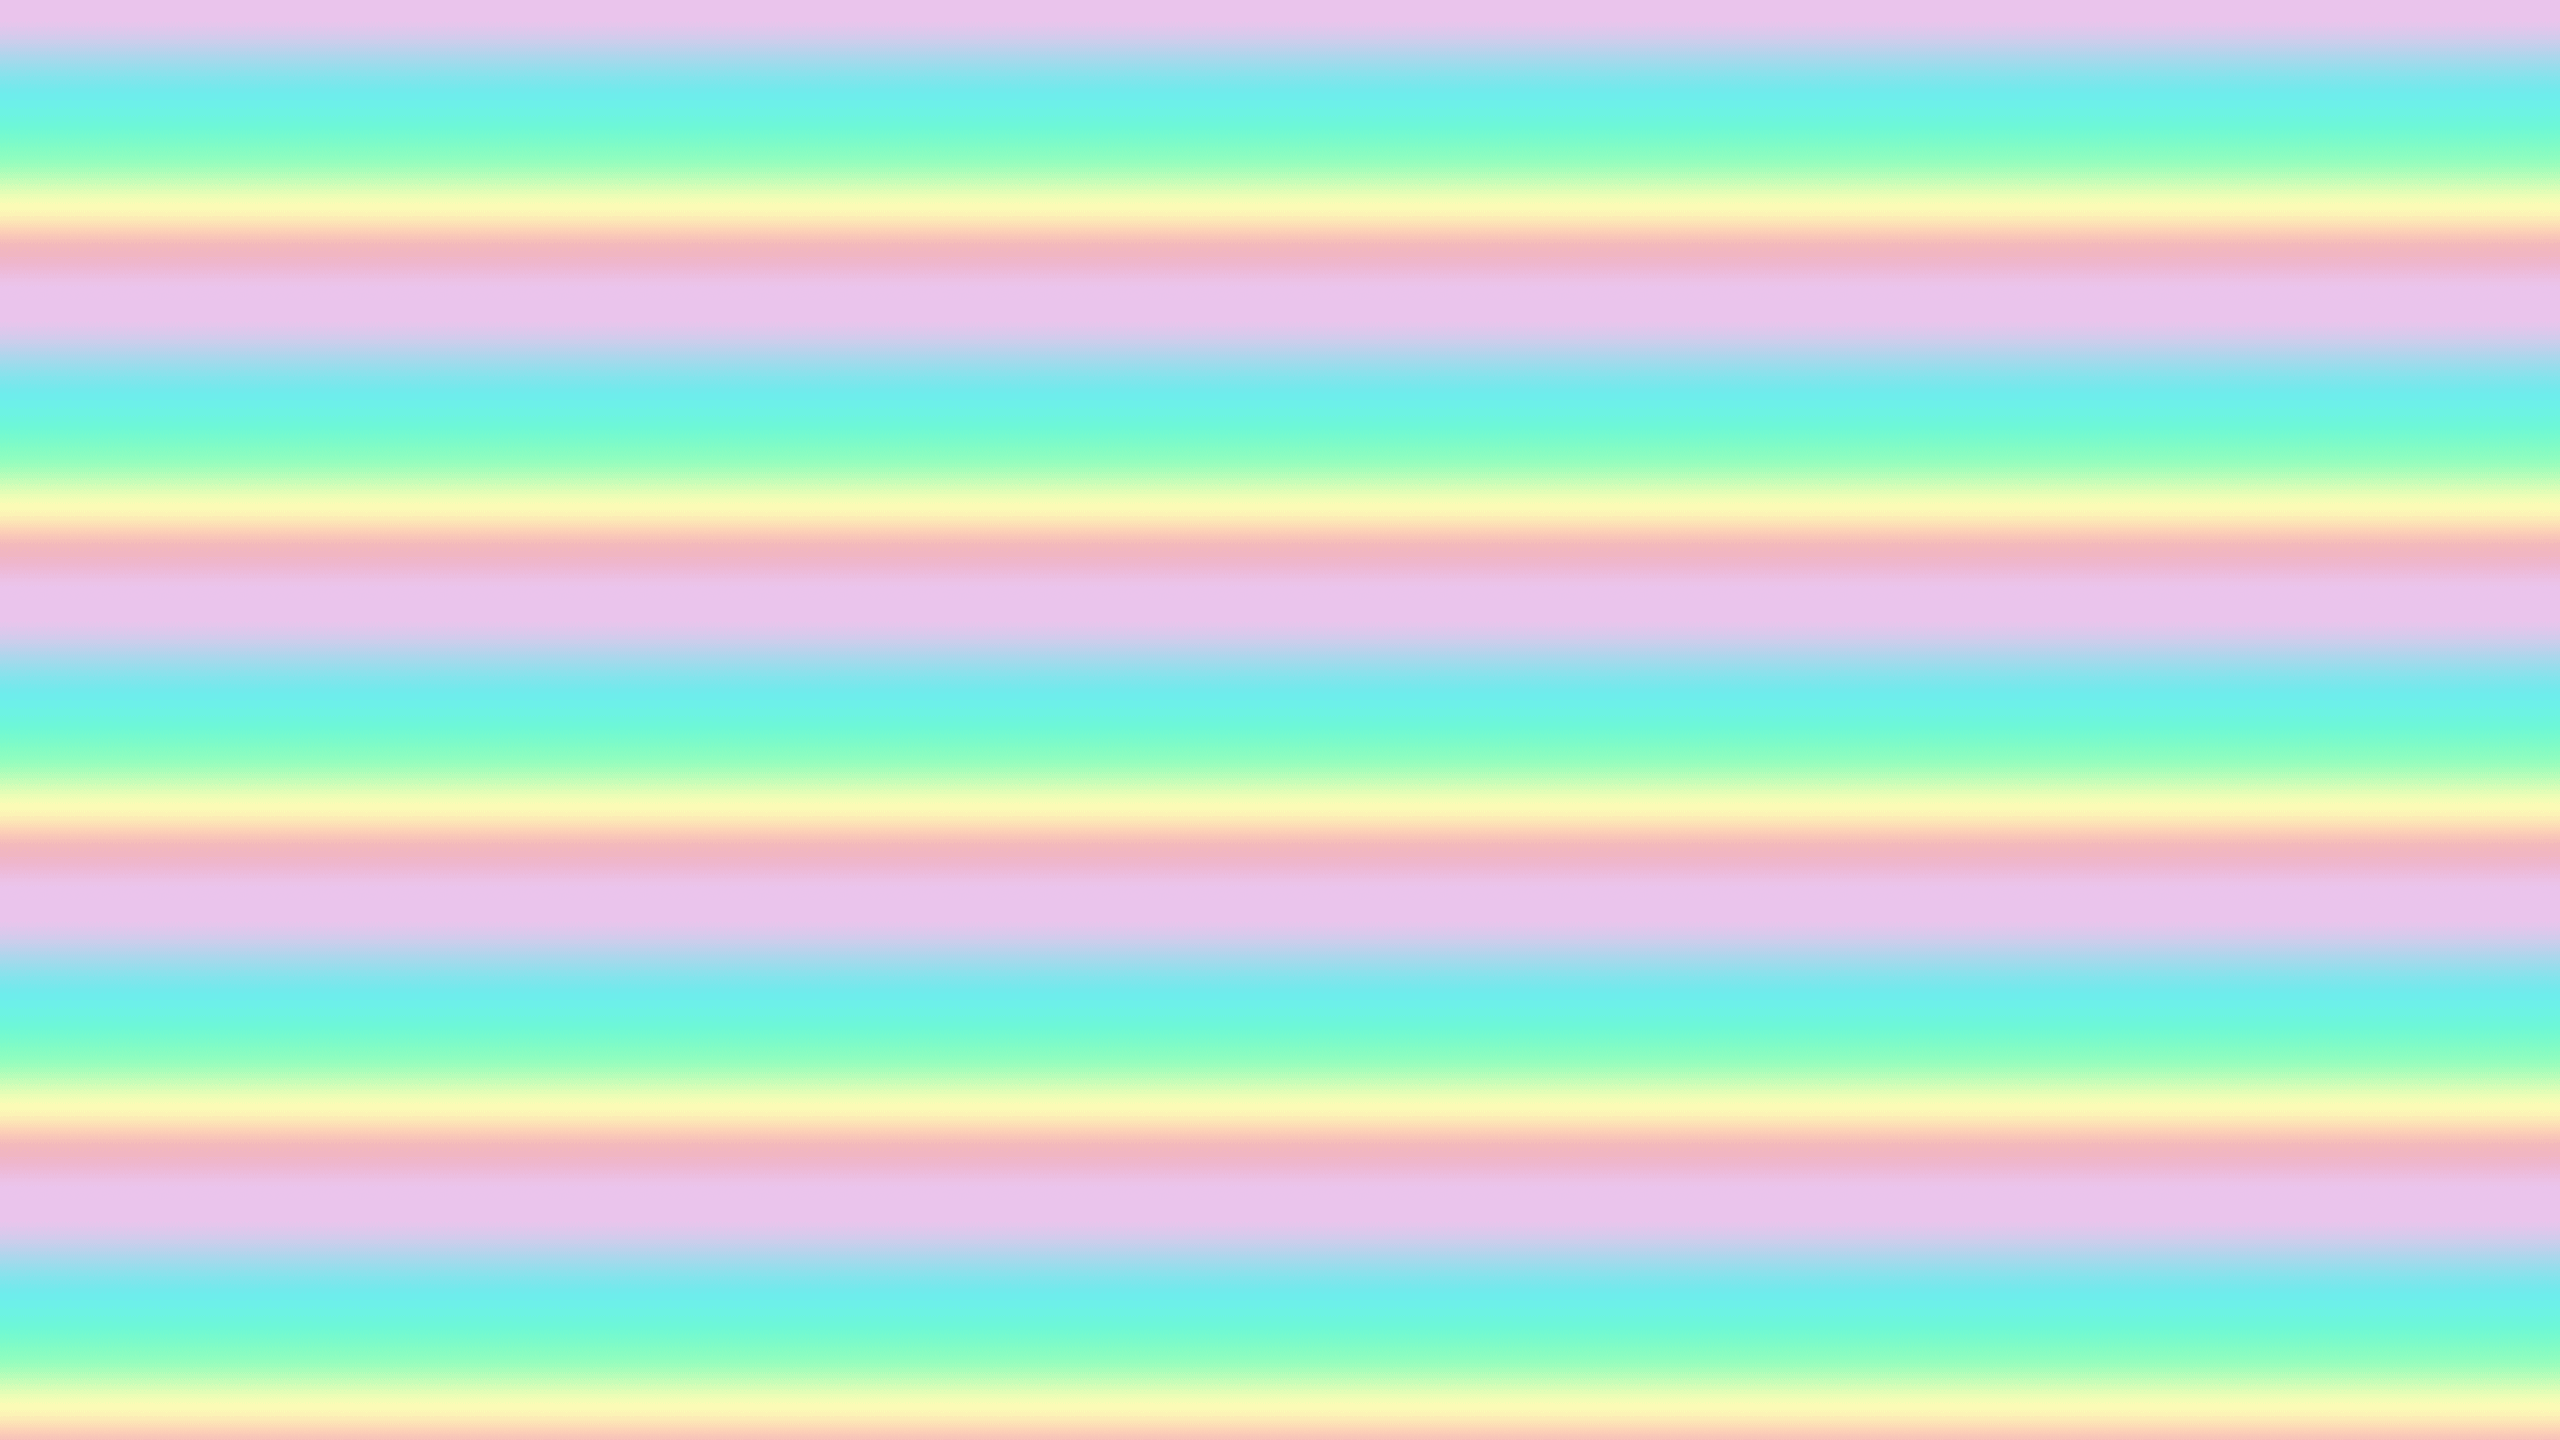 This Pastel Rainbow Desktop Wallpaper Is Easy Just Save The